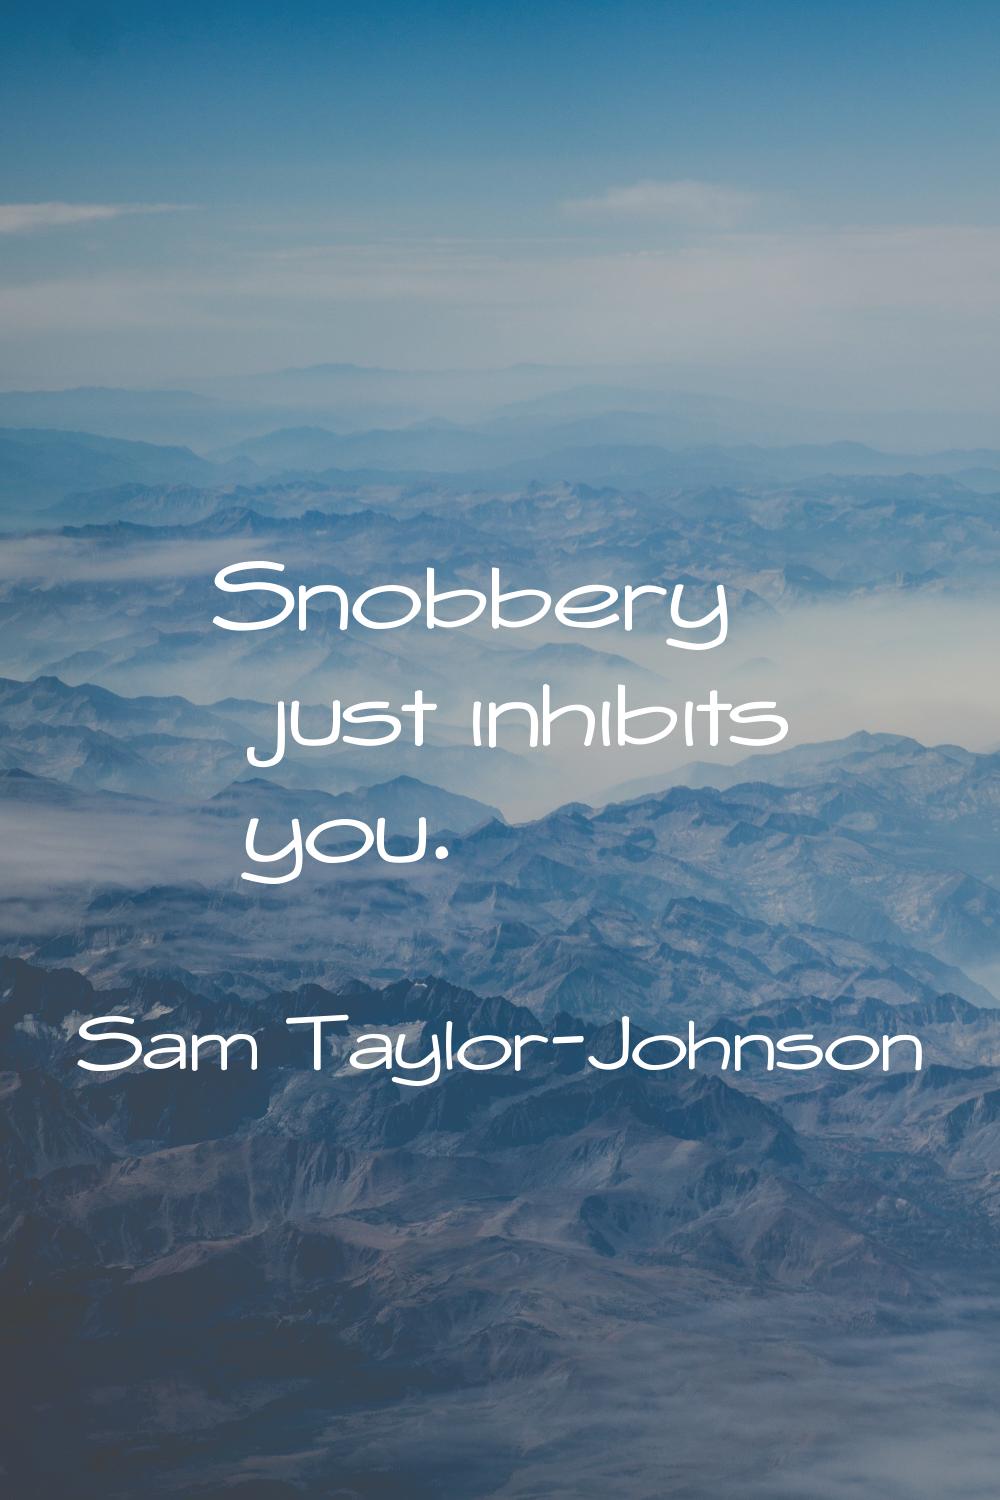 Snobbery just inhibits you.